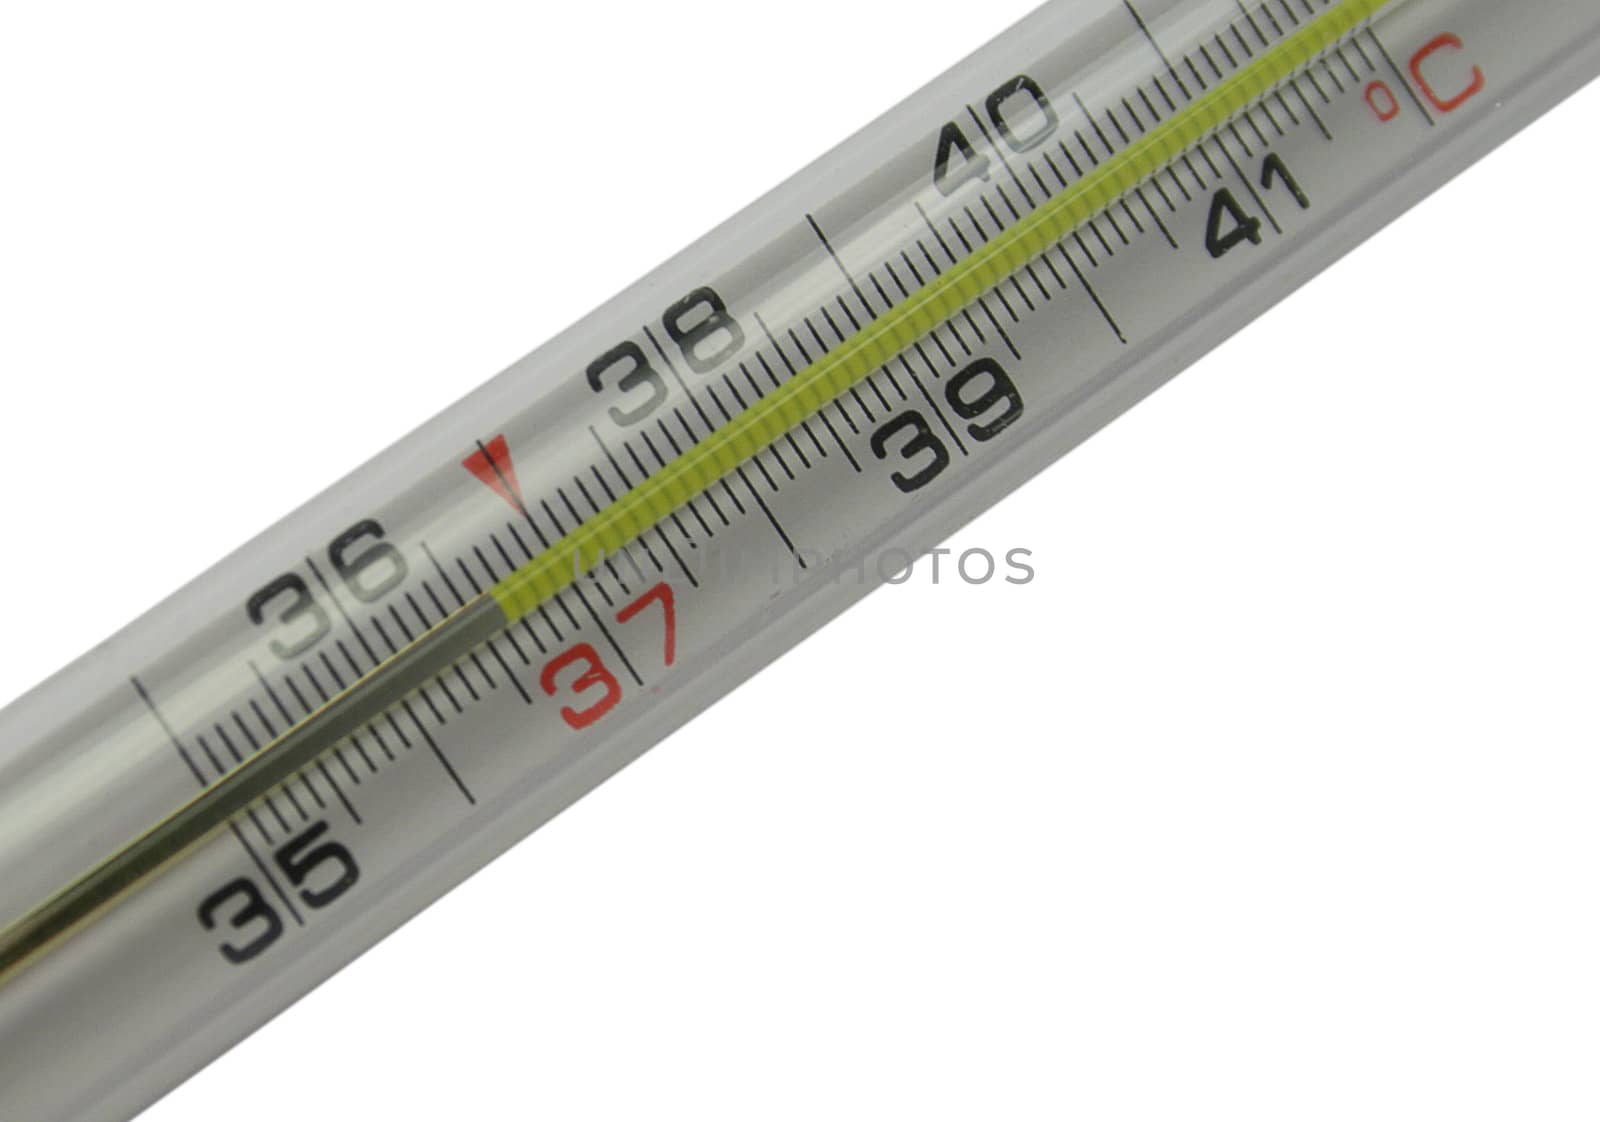 Mercurial thermometer scale (36,6) isolated on a white background (over white)